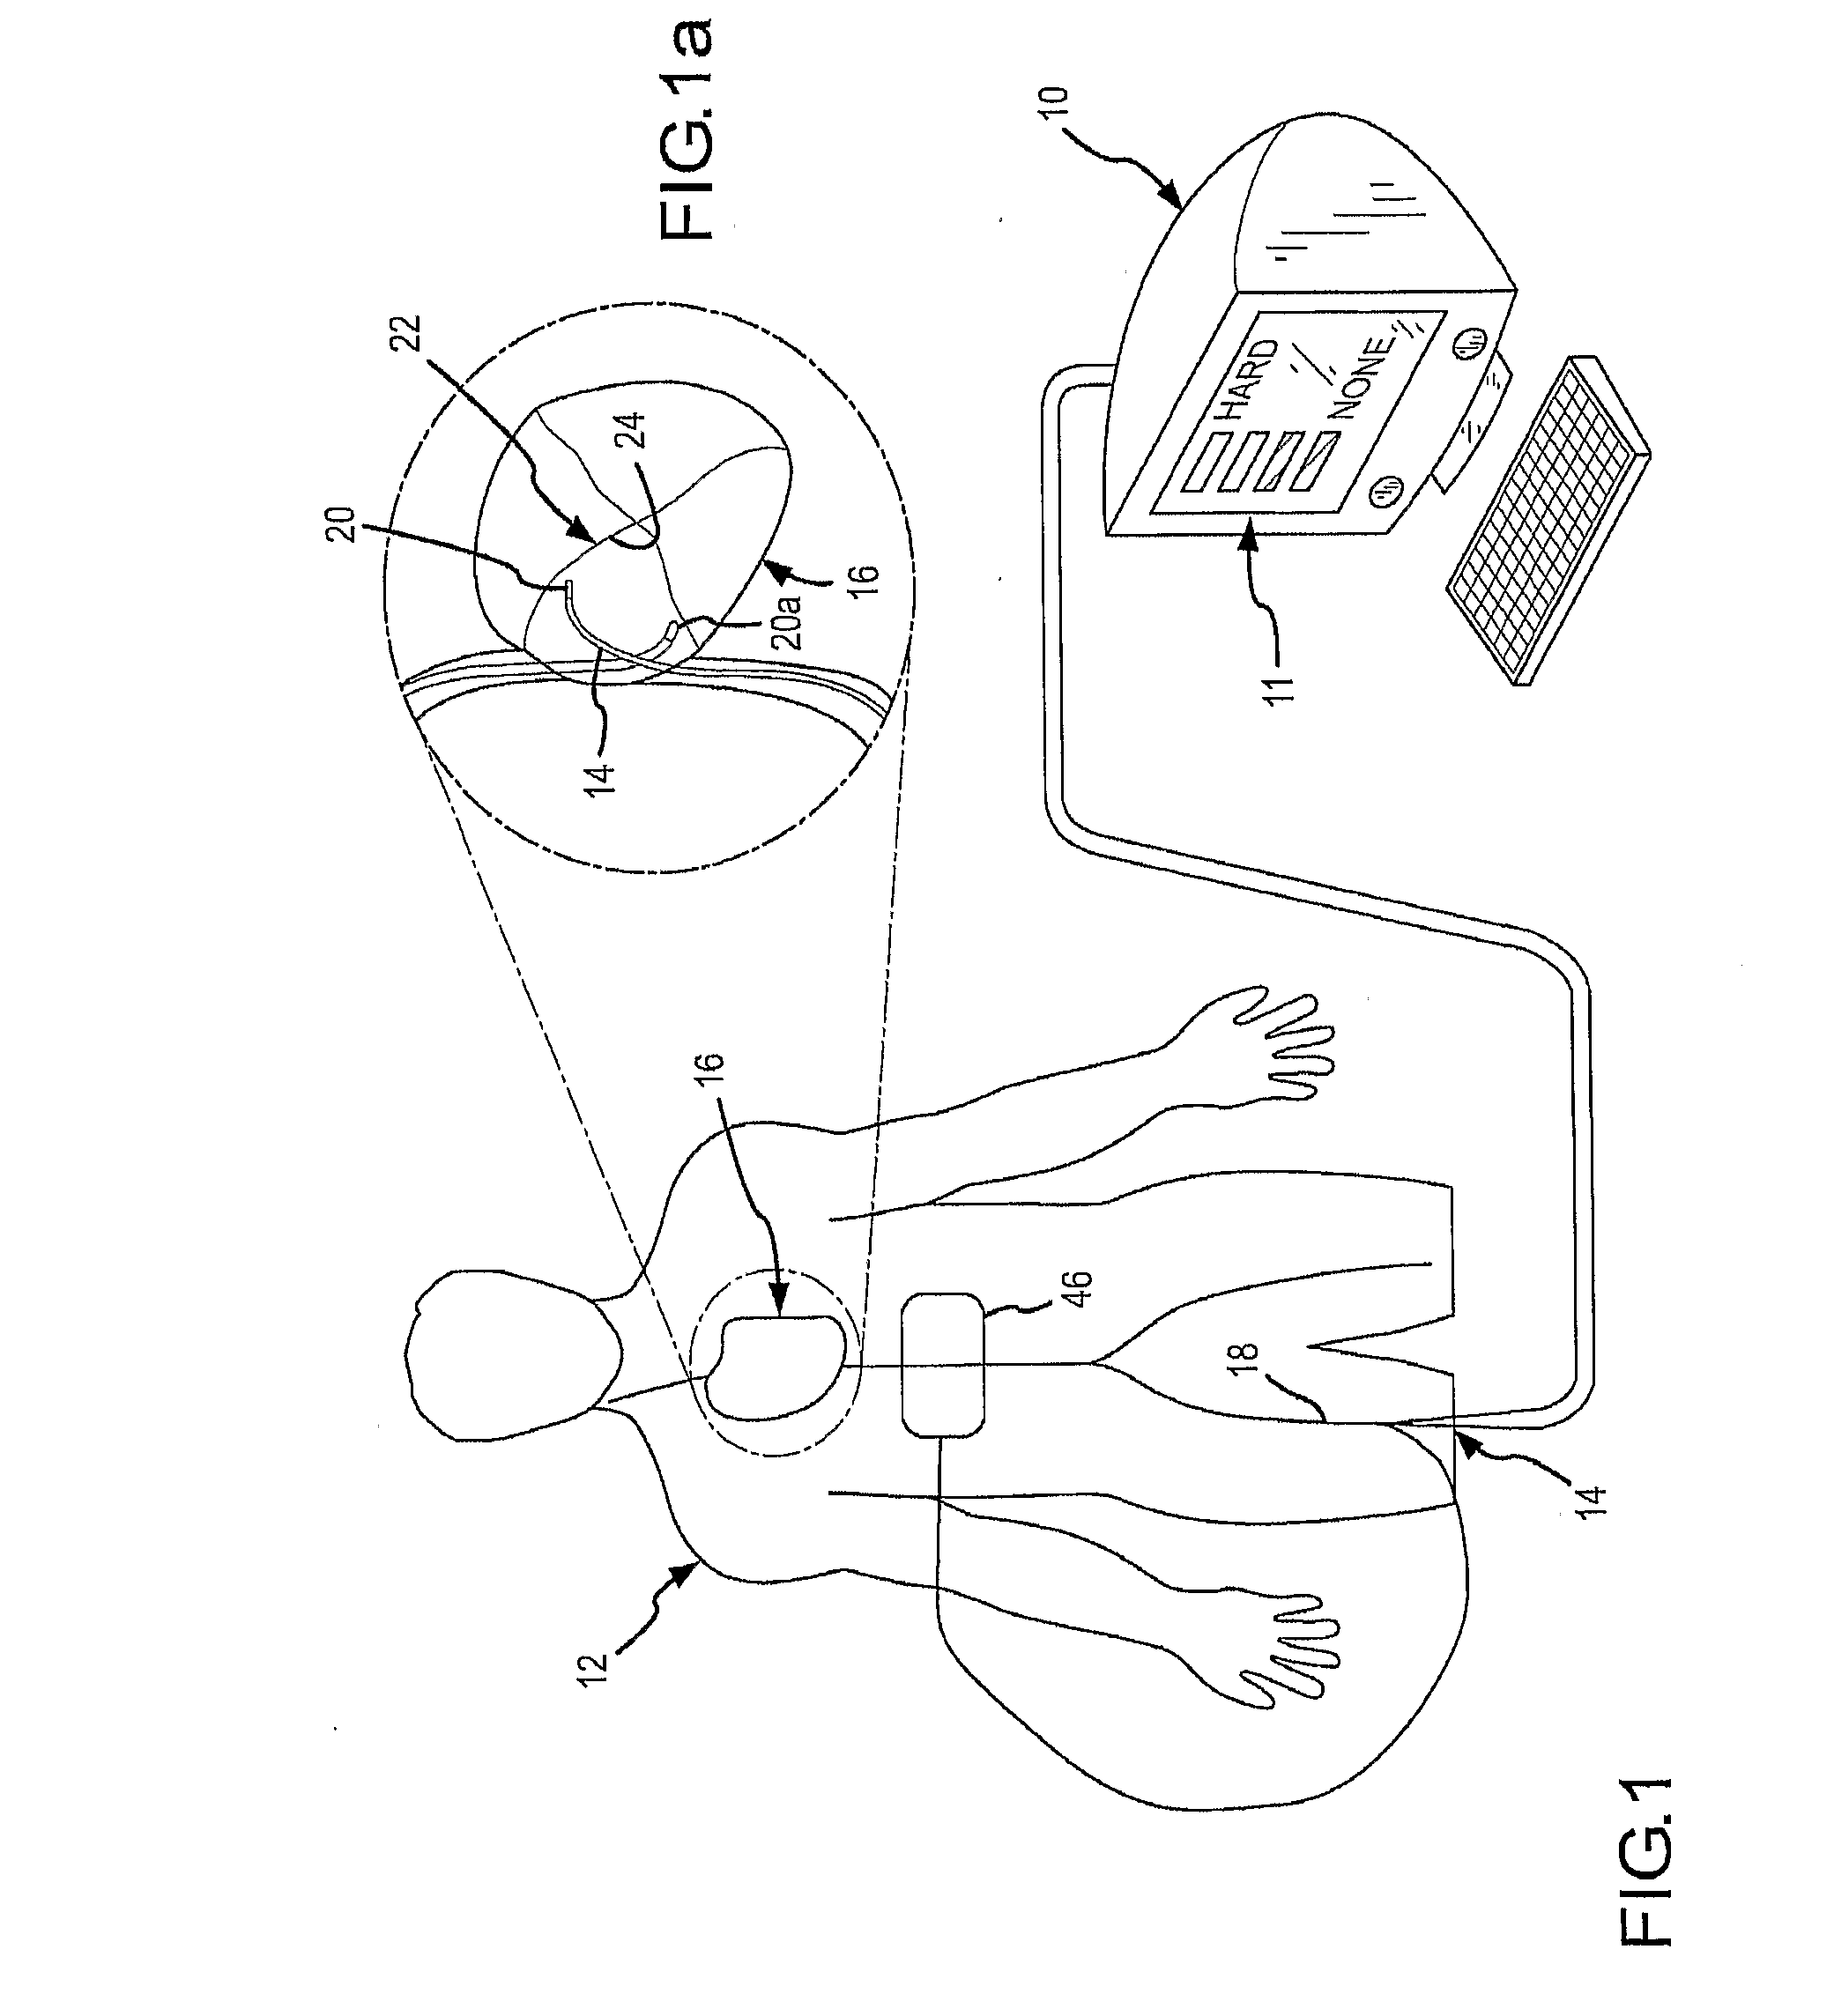 Method for Displaying Catheter Electrode-Tissue Contact in Electro-Anatomic Mapping and Navigation System